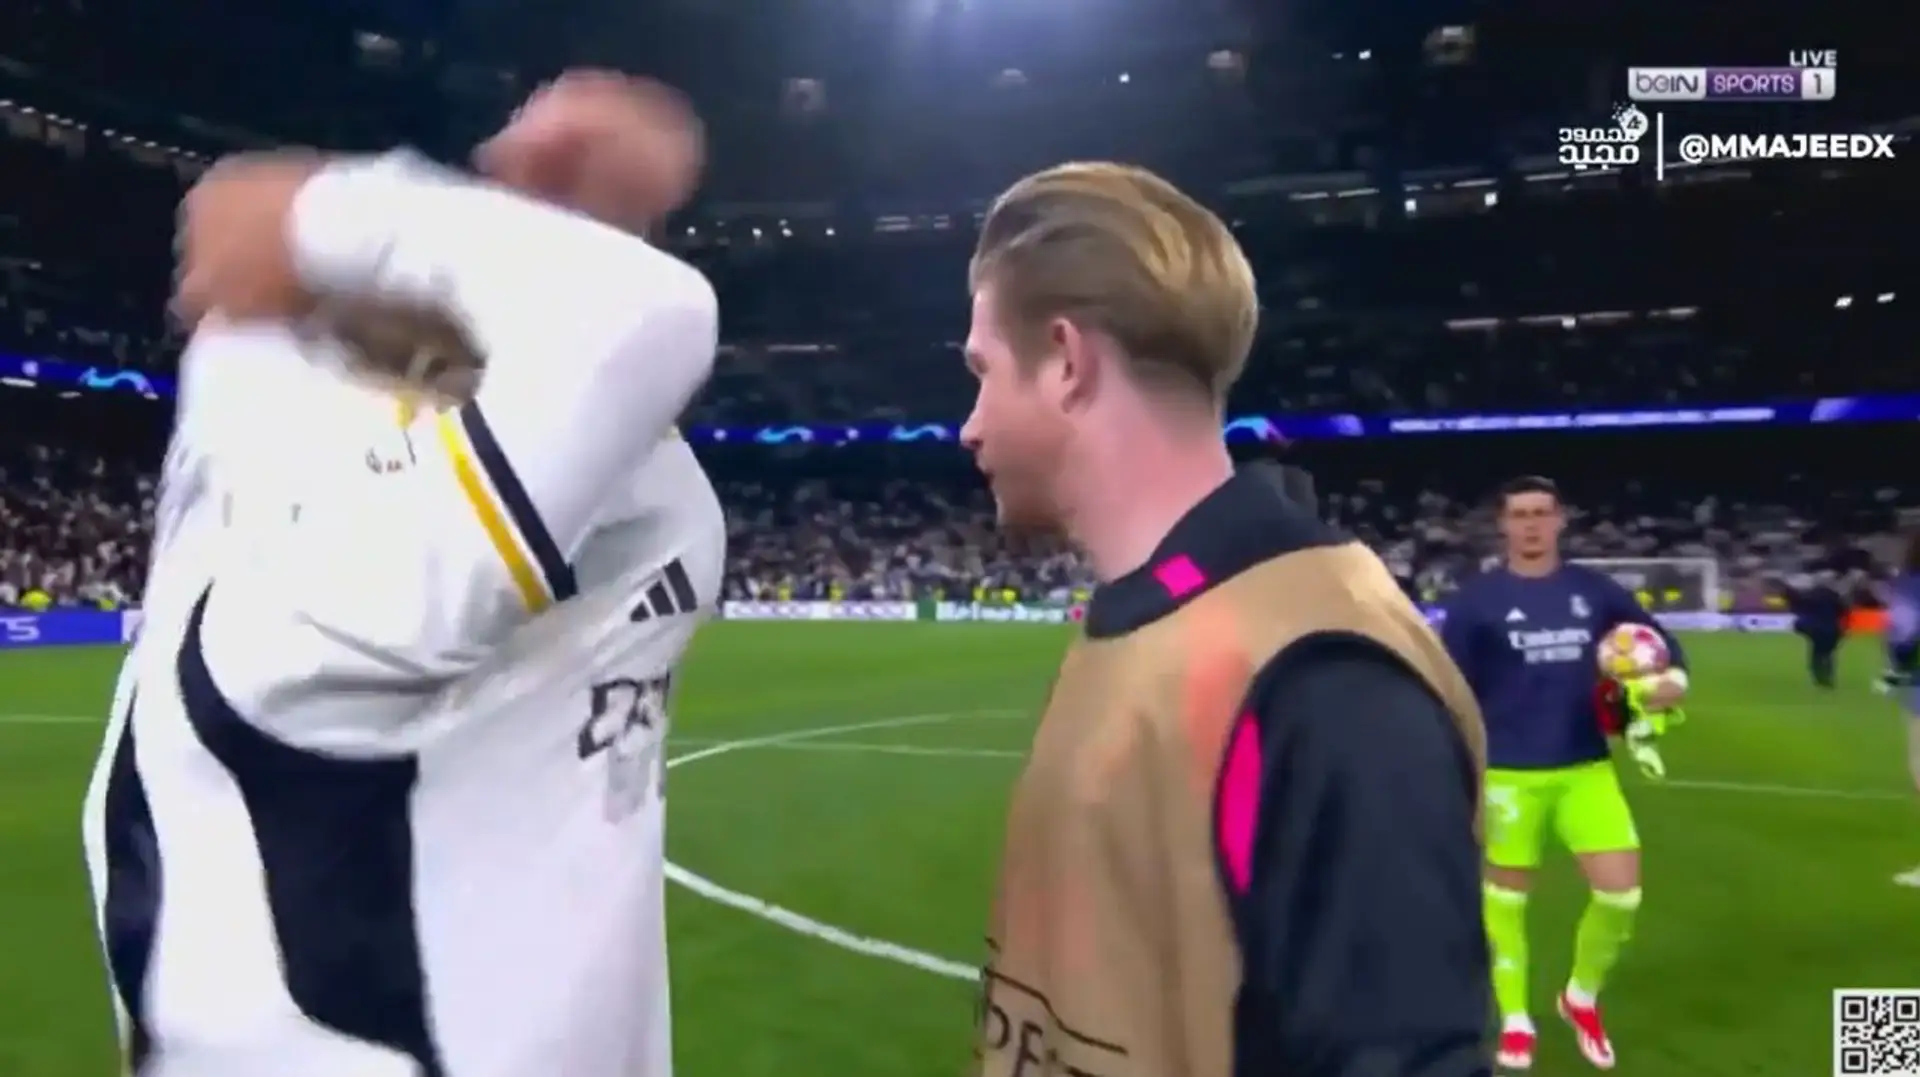 De Bruyne asks for Modric's jersey at full time, Luka's reaction spotted -  Football | Tribuna.com